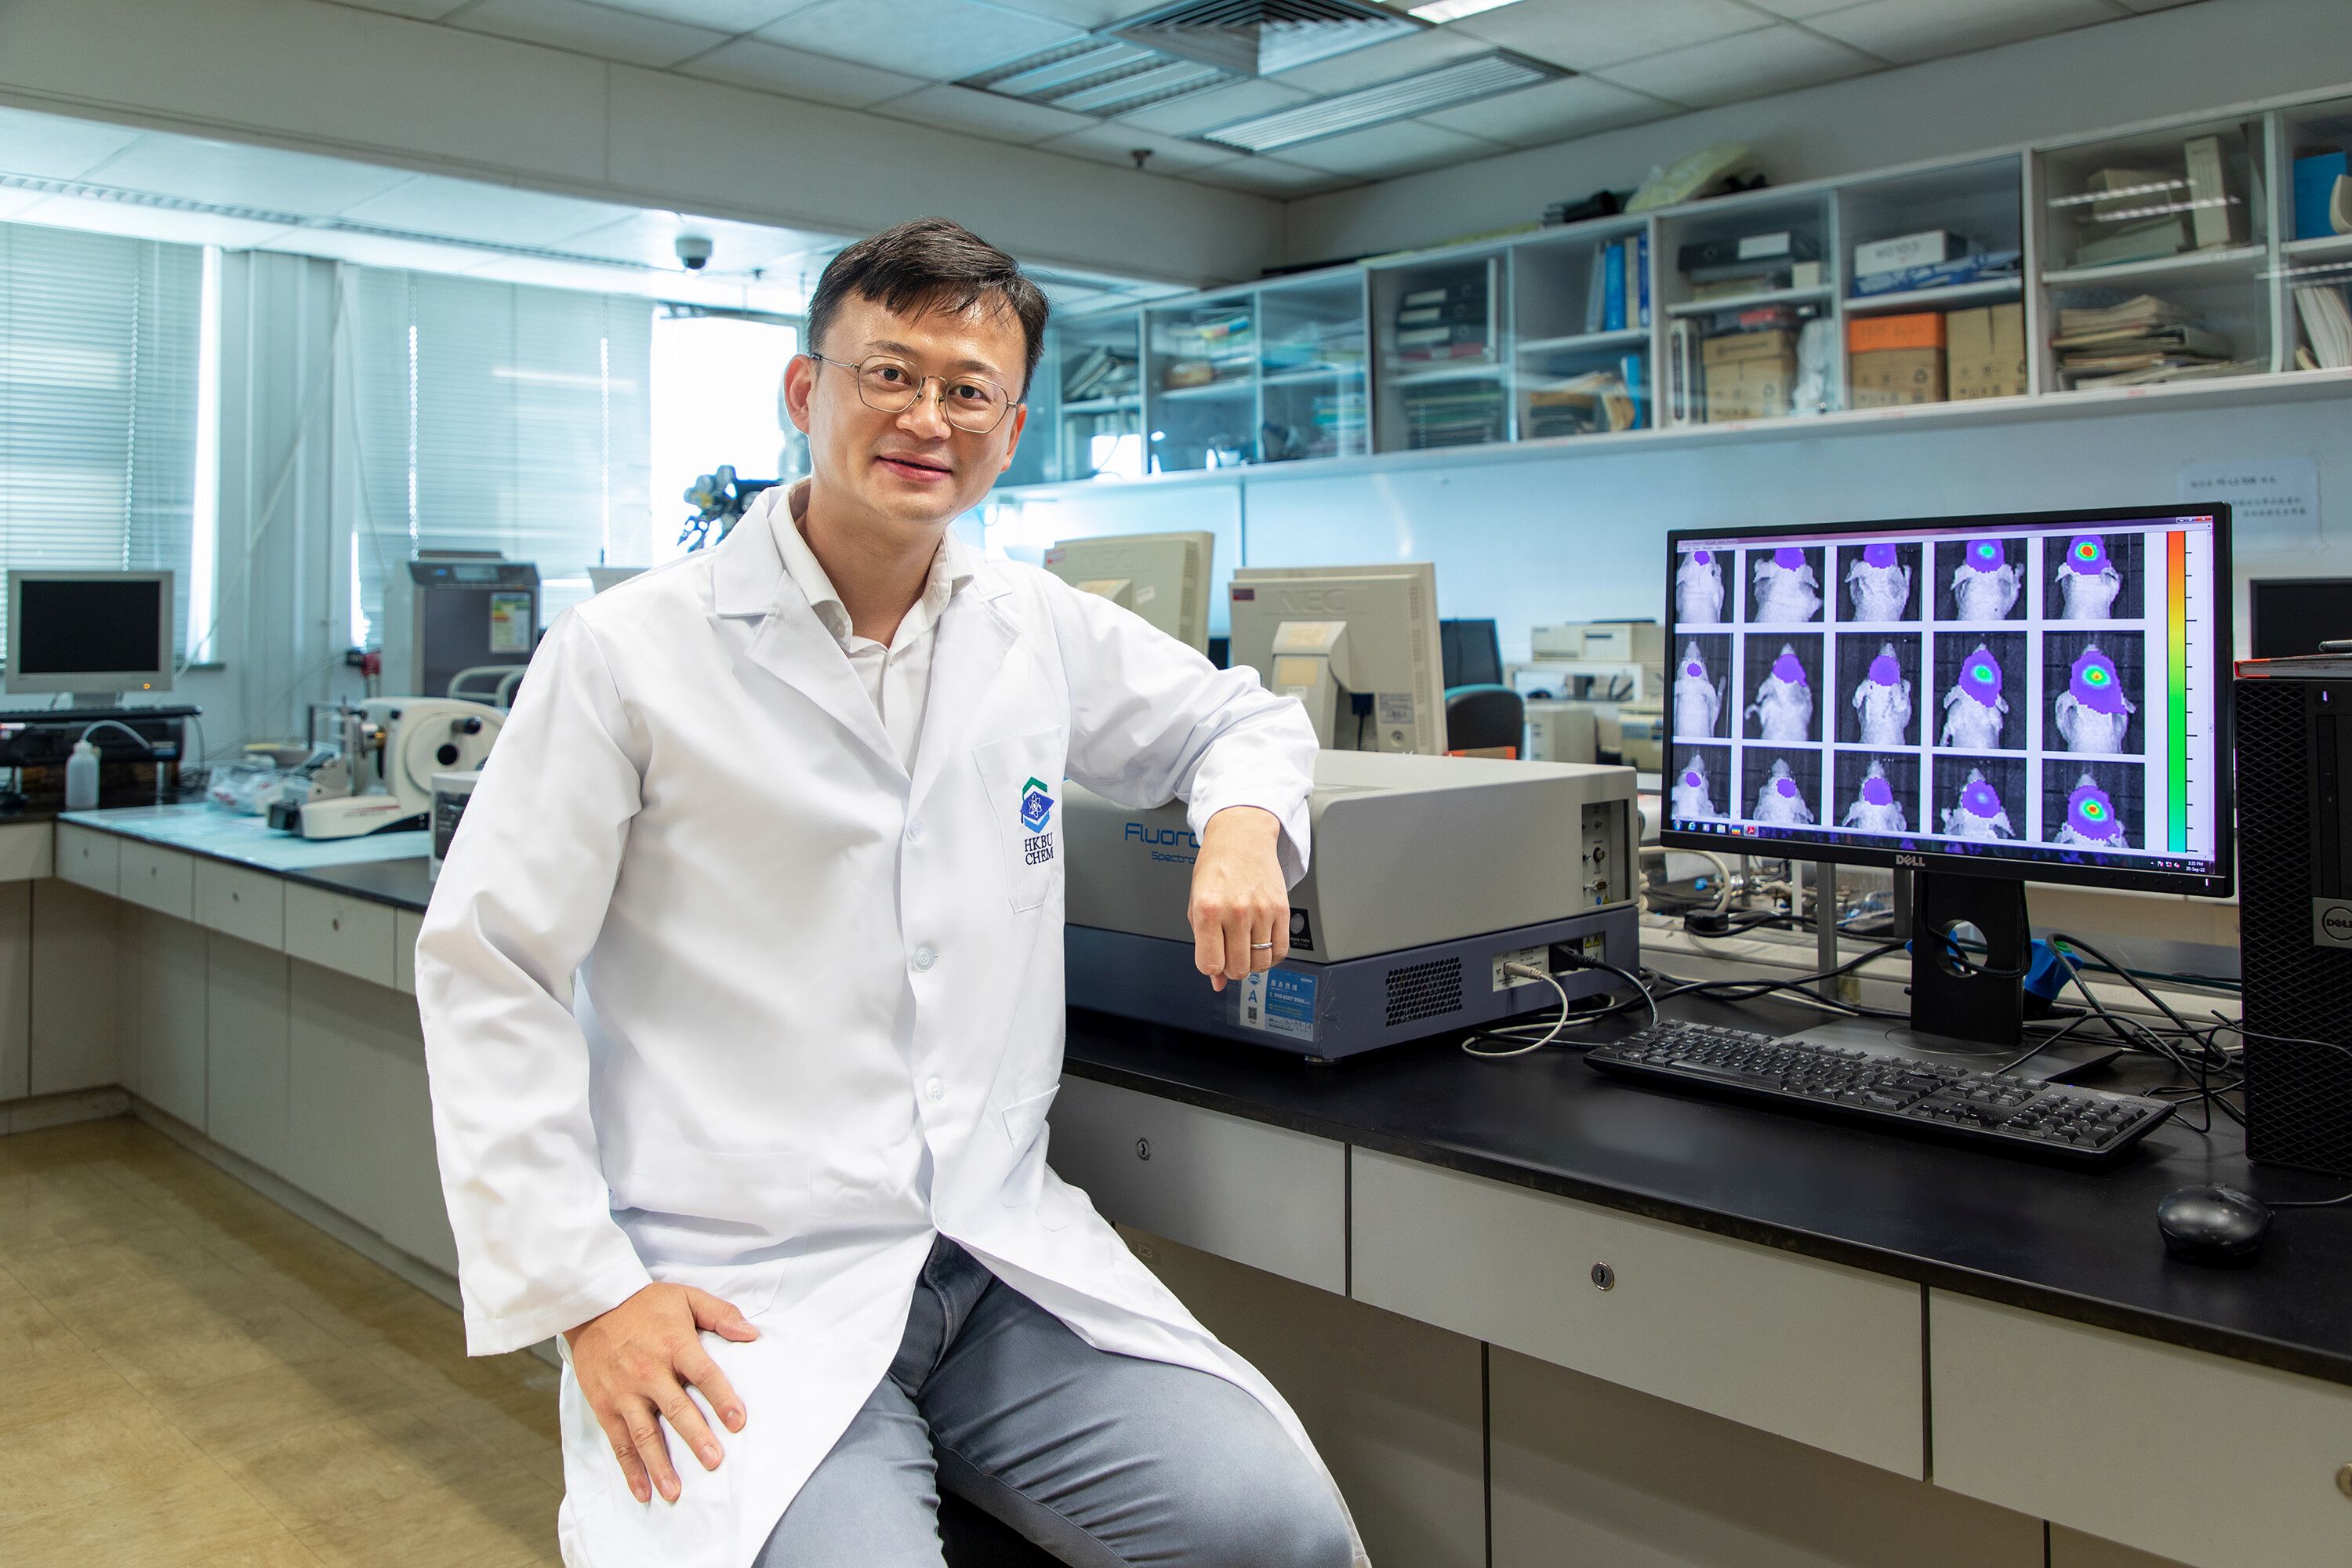 The research team led by Dr Wang Yi, Assistant Professor of the Department of Chemistry at HKBU, has developed a near-infrared persistent luminescence nanoparticle named TRZD for the diagnosis and treatment of glioma.